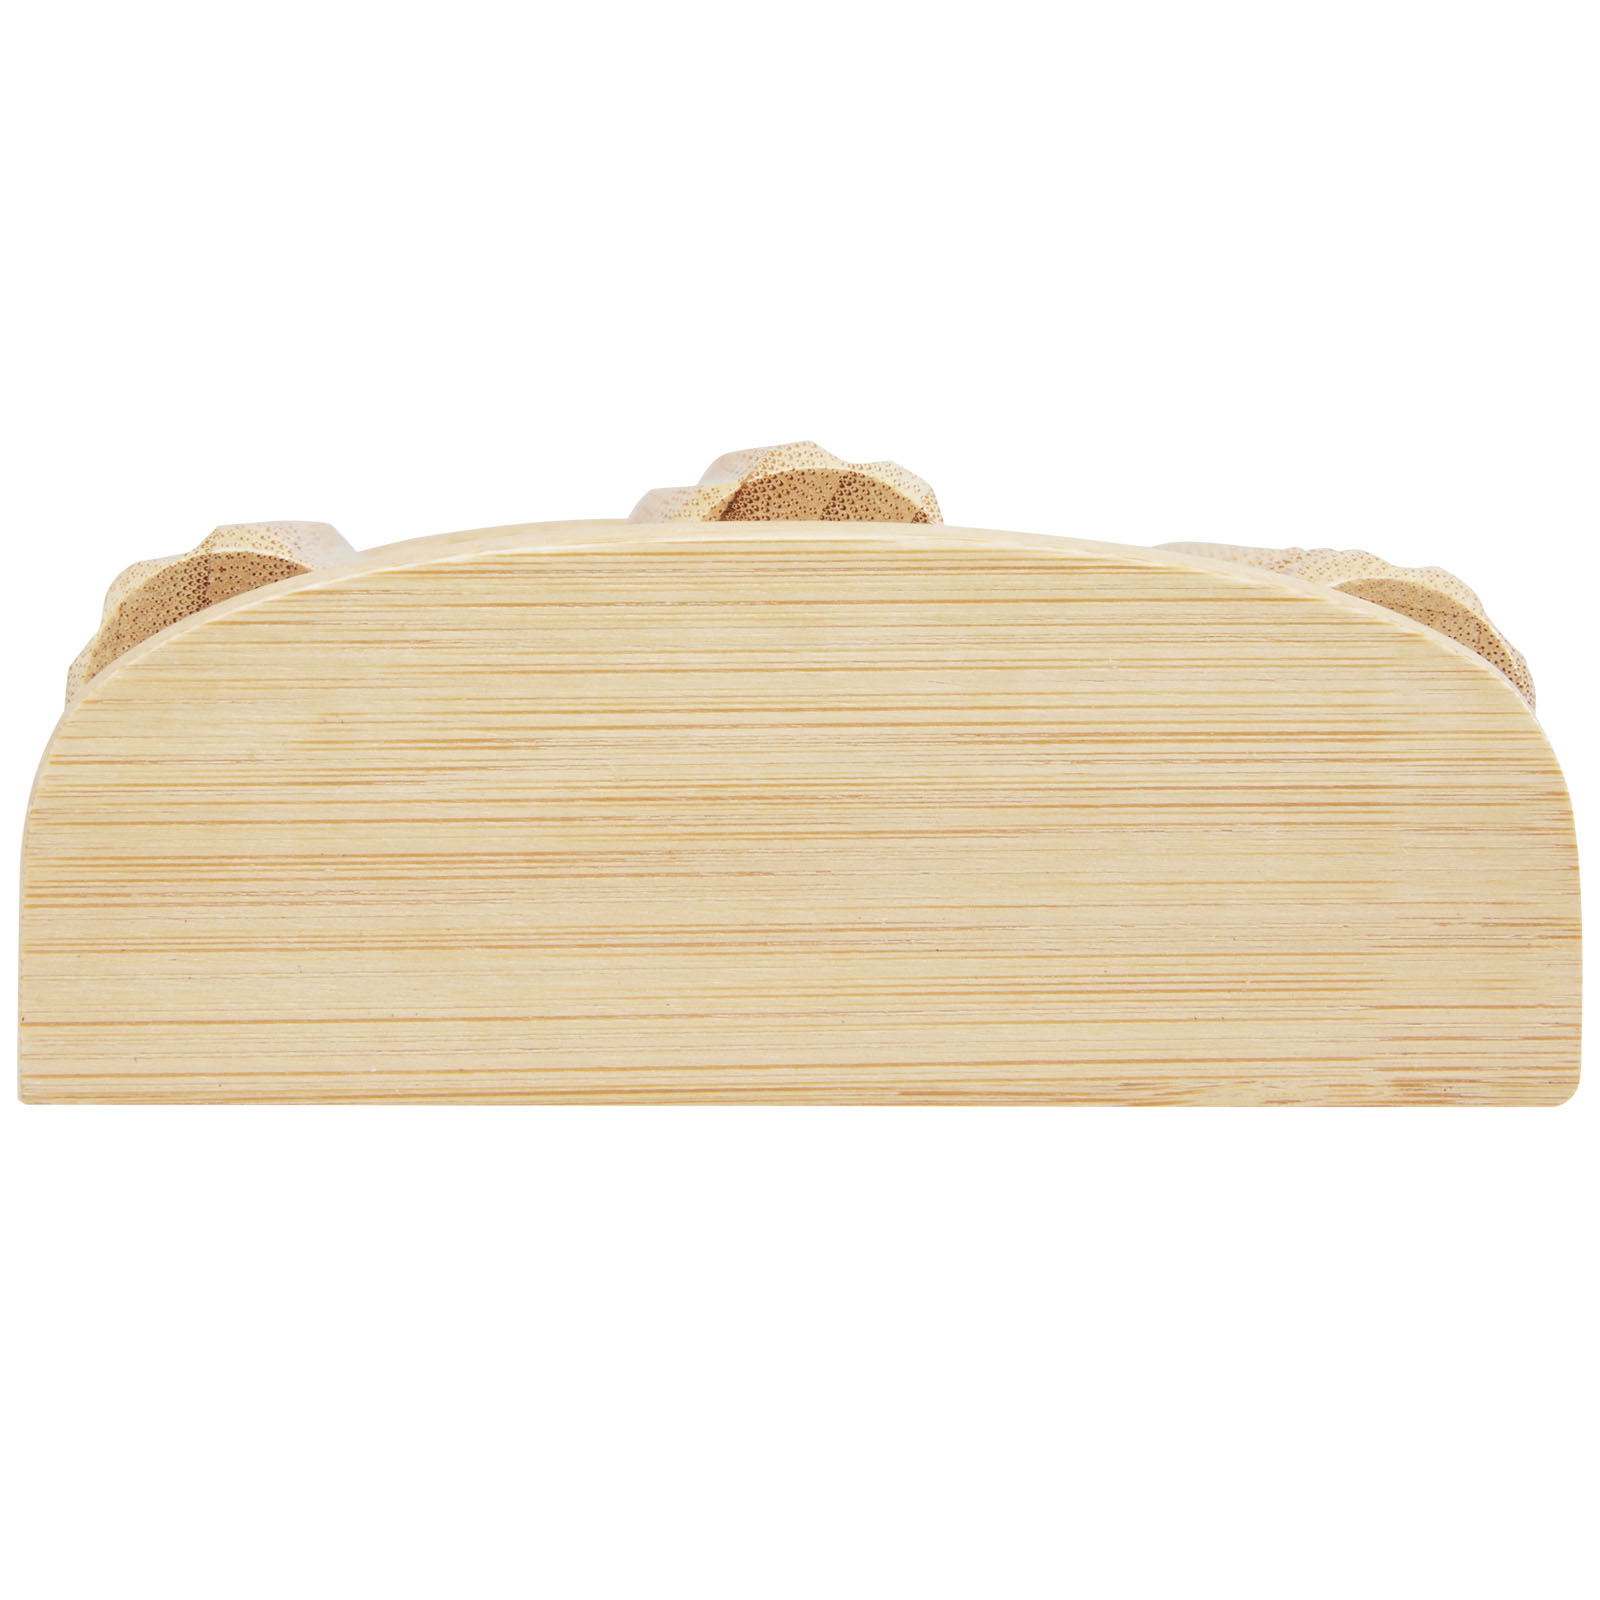 Advertising Personal Care - Venis bamboo foot massager - 1